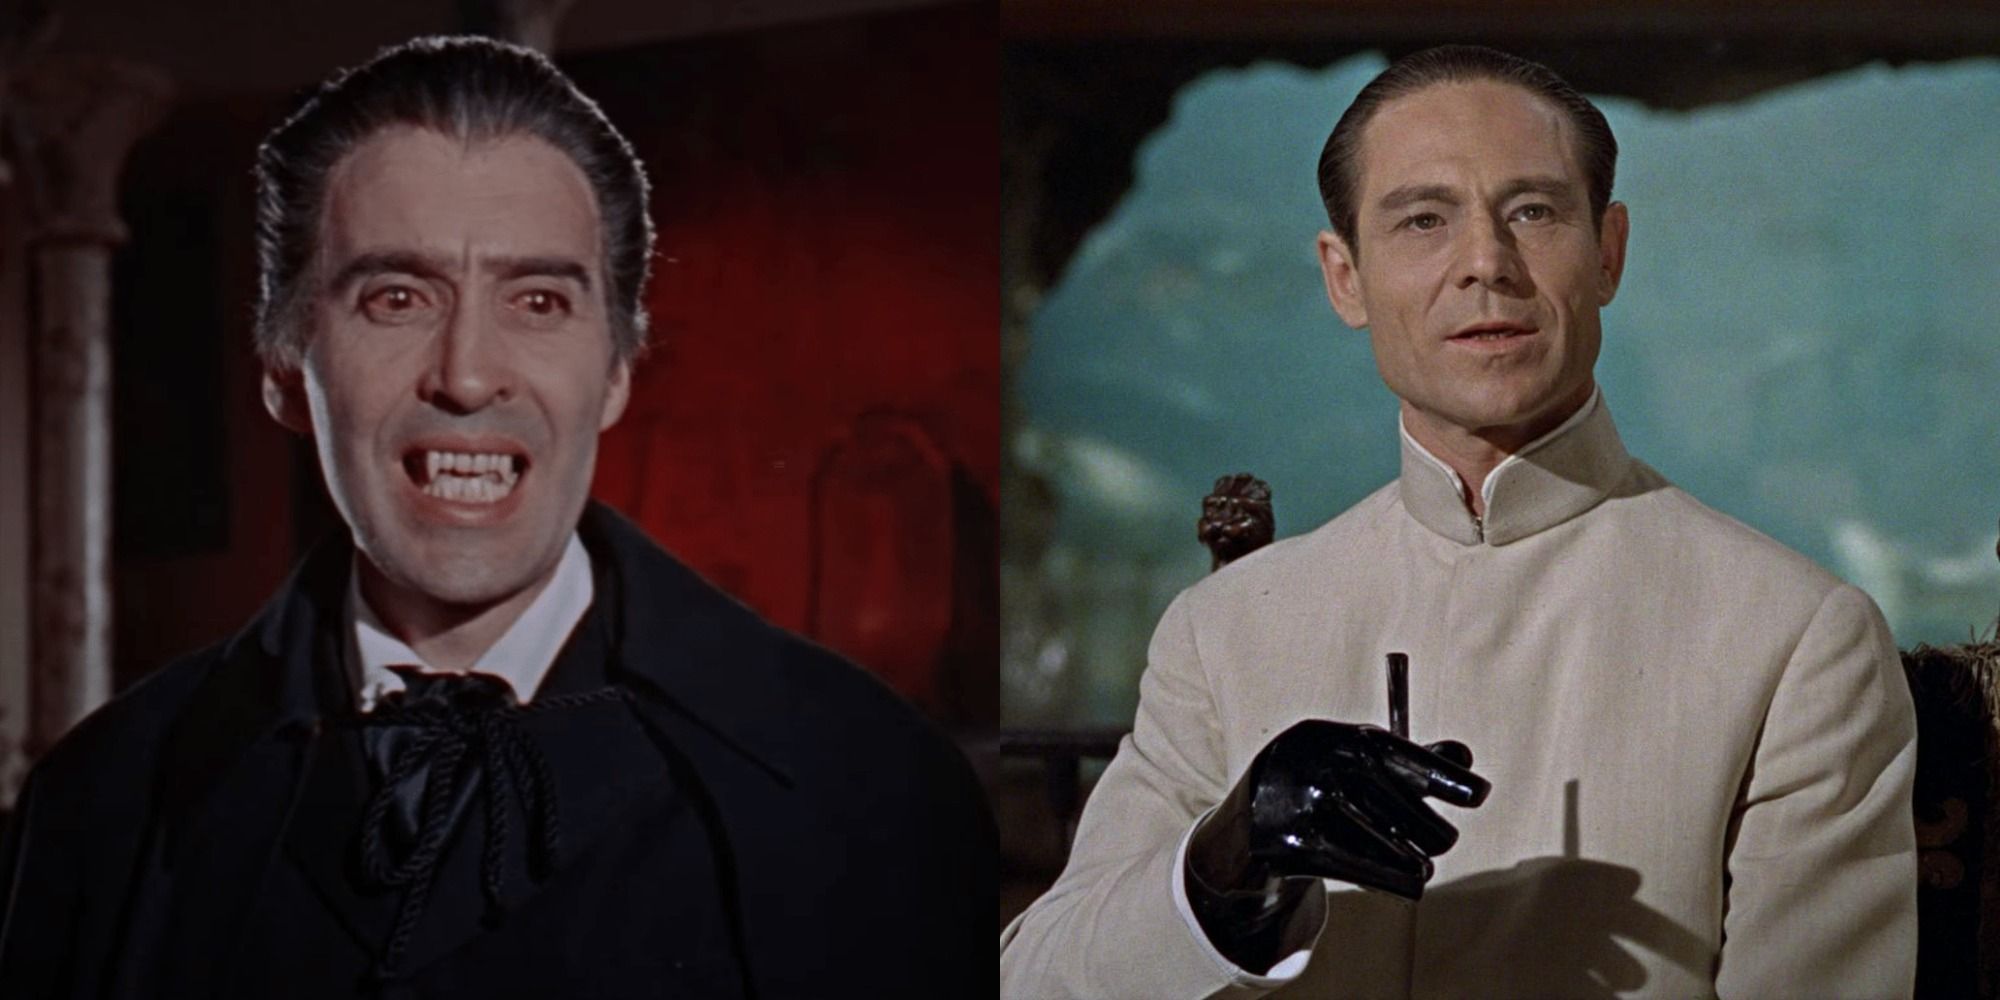 Split image of Christopher Lee as Dracula and Dr. No